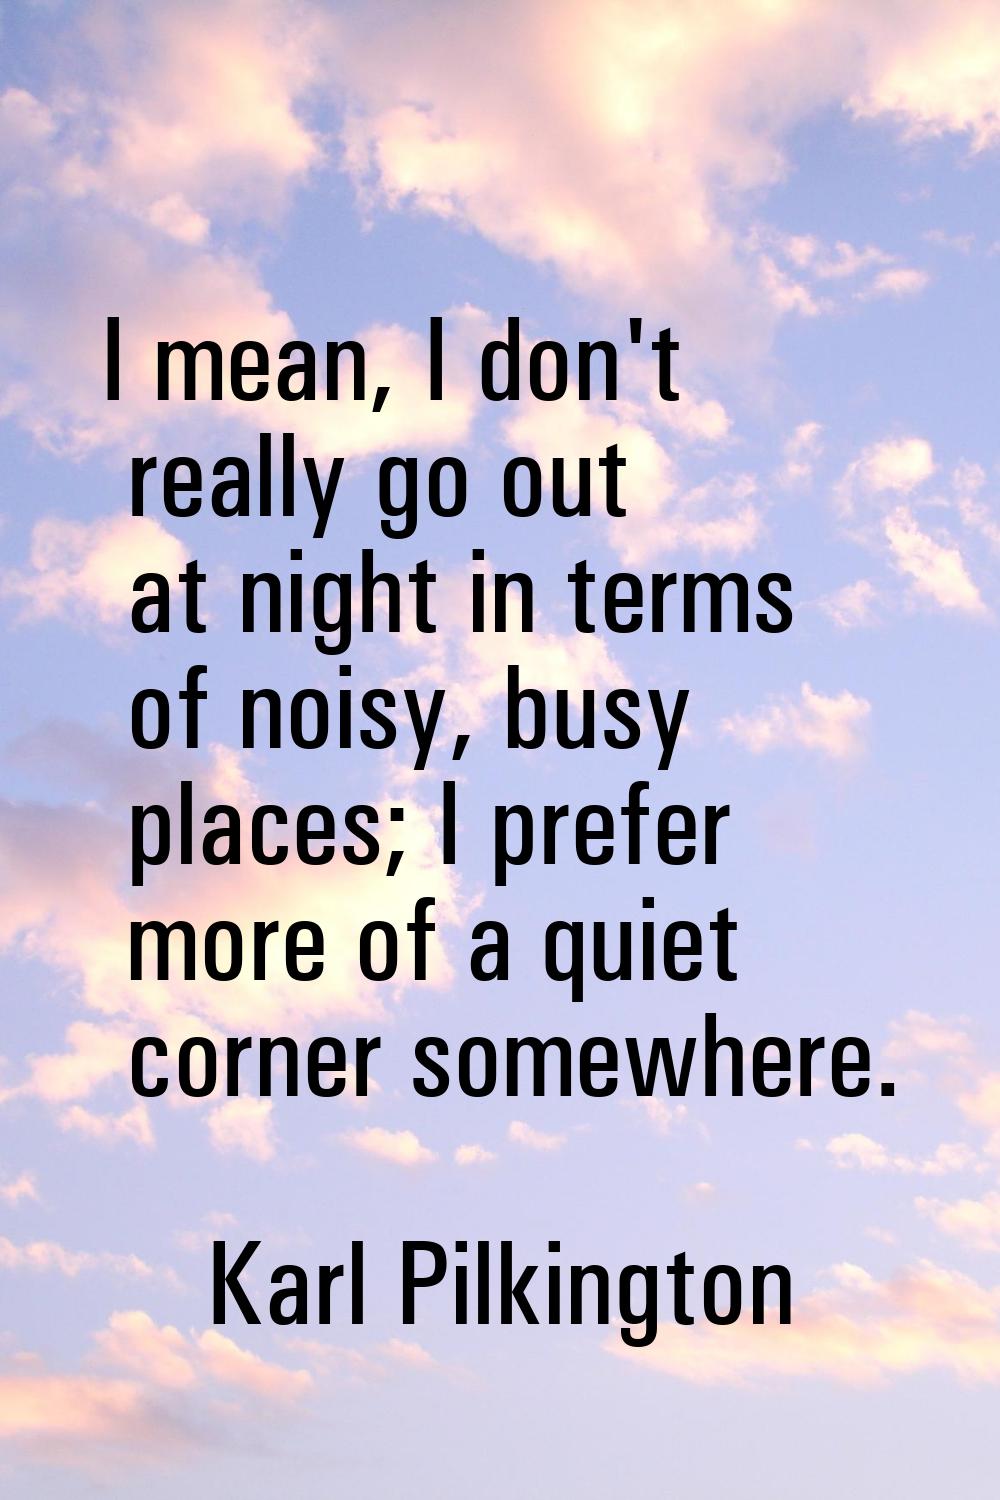 I mean, I don't really go out at night in terms of noisy, busy places; I prefer more of a quiet cor